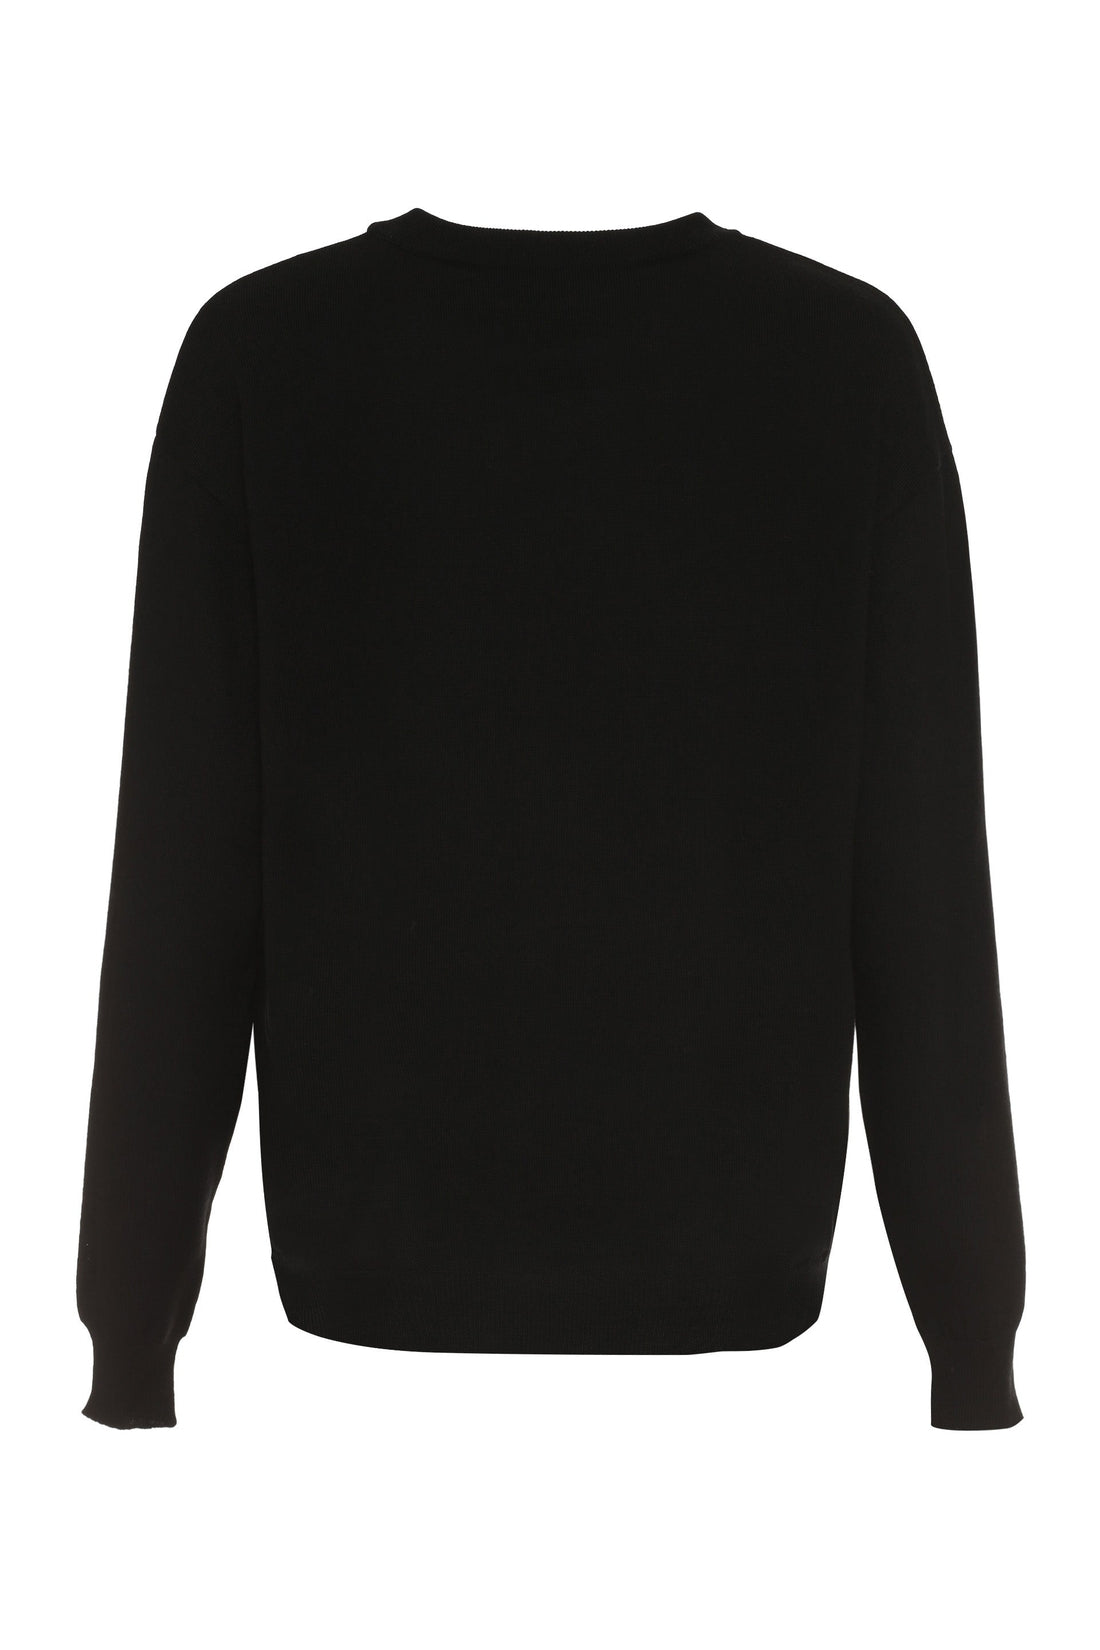 Moschino-OUTLET-SALE-Intarsia wool sweater-ARCHIVIST